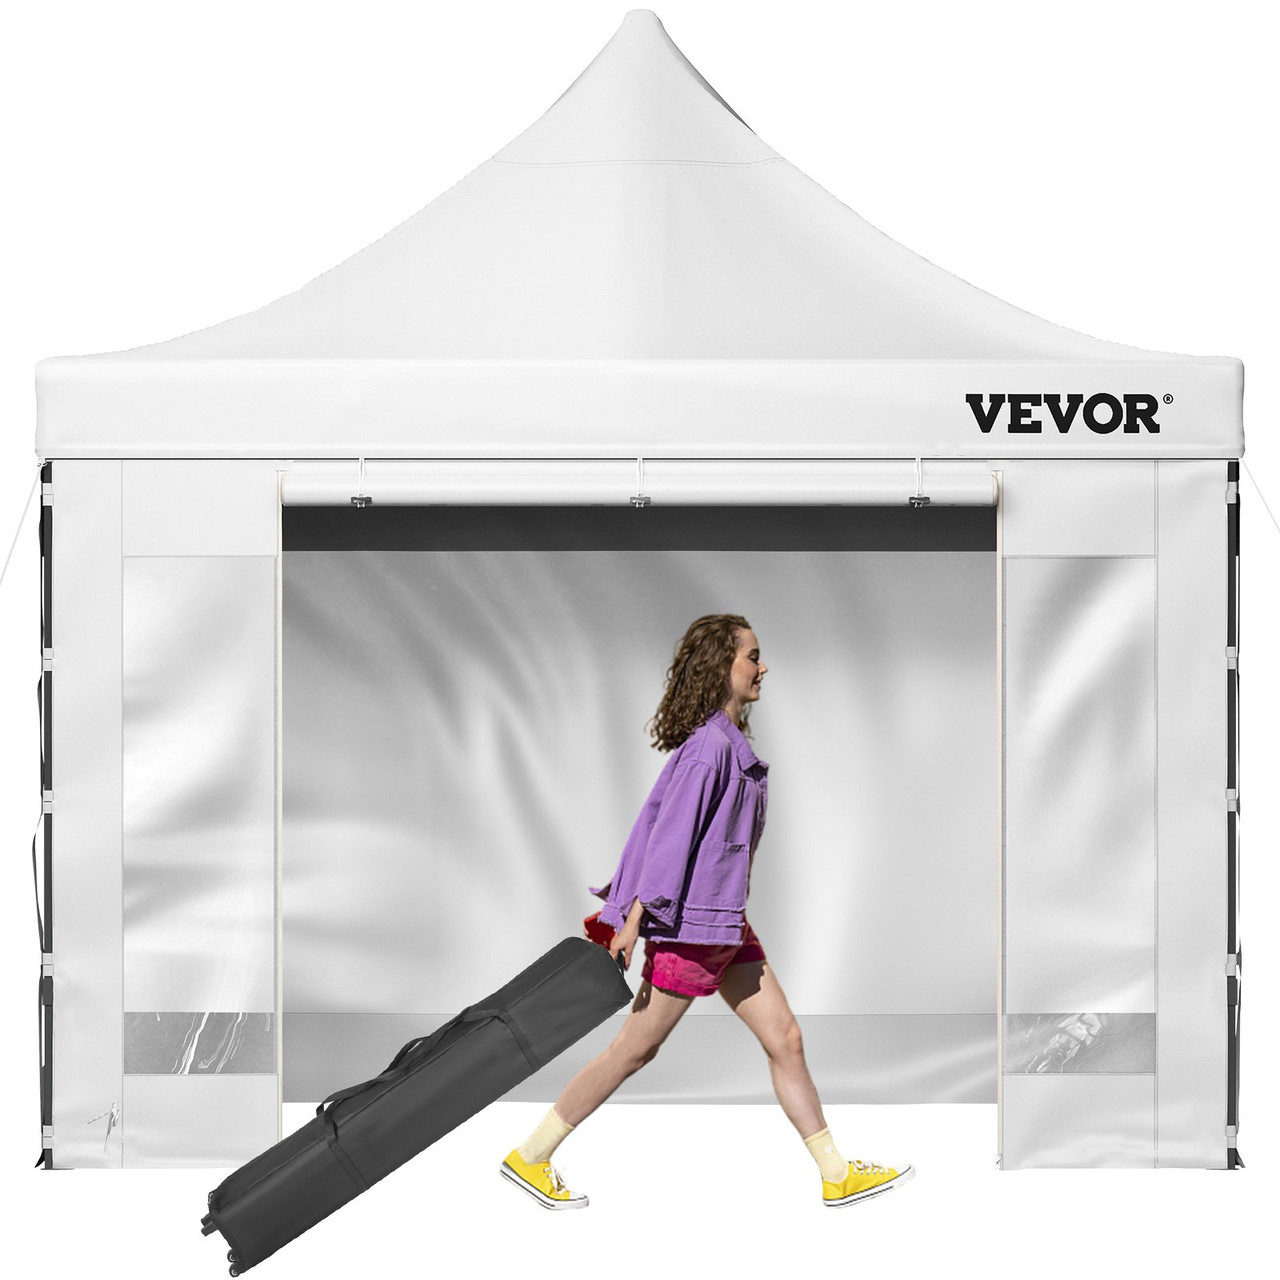 Pop Up Canopy Tent, 10 x 10 FT, Outdoor Patio Gazebo Tent with Removable Sidewalls and Wheeled Bag, UV Resistant Waterproof Instant Gazebo Shelter for Party, Garden, Backyard, White